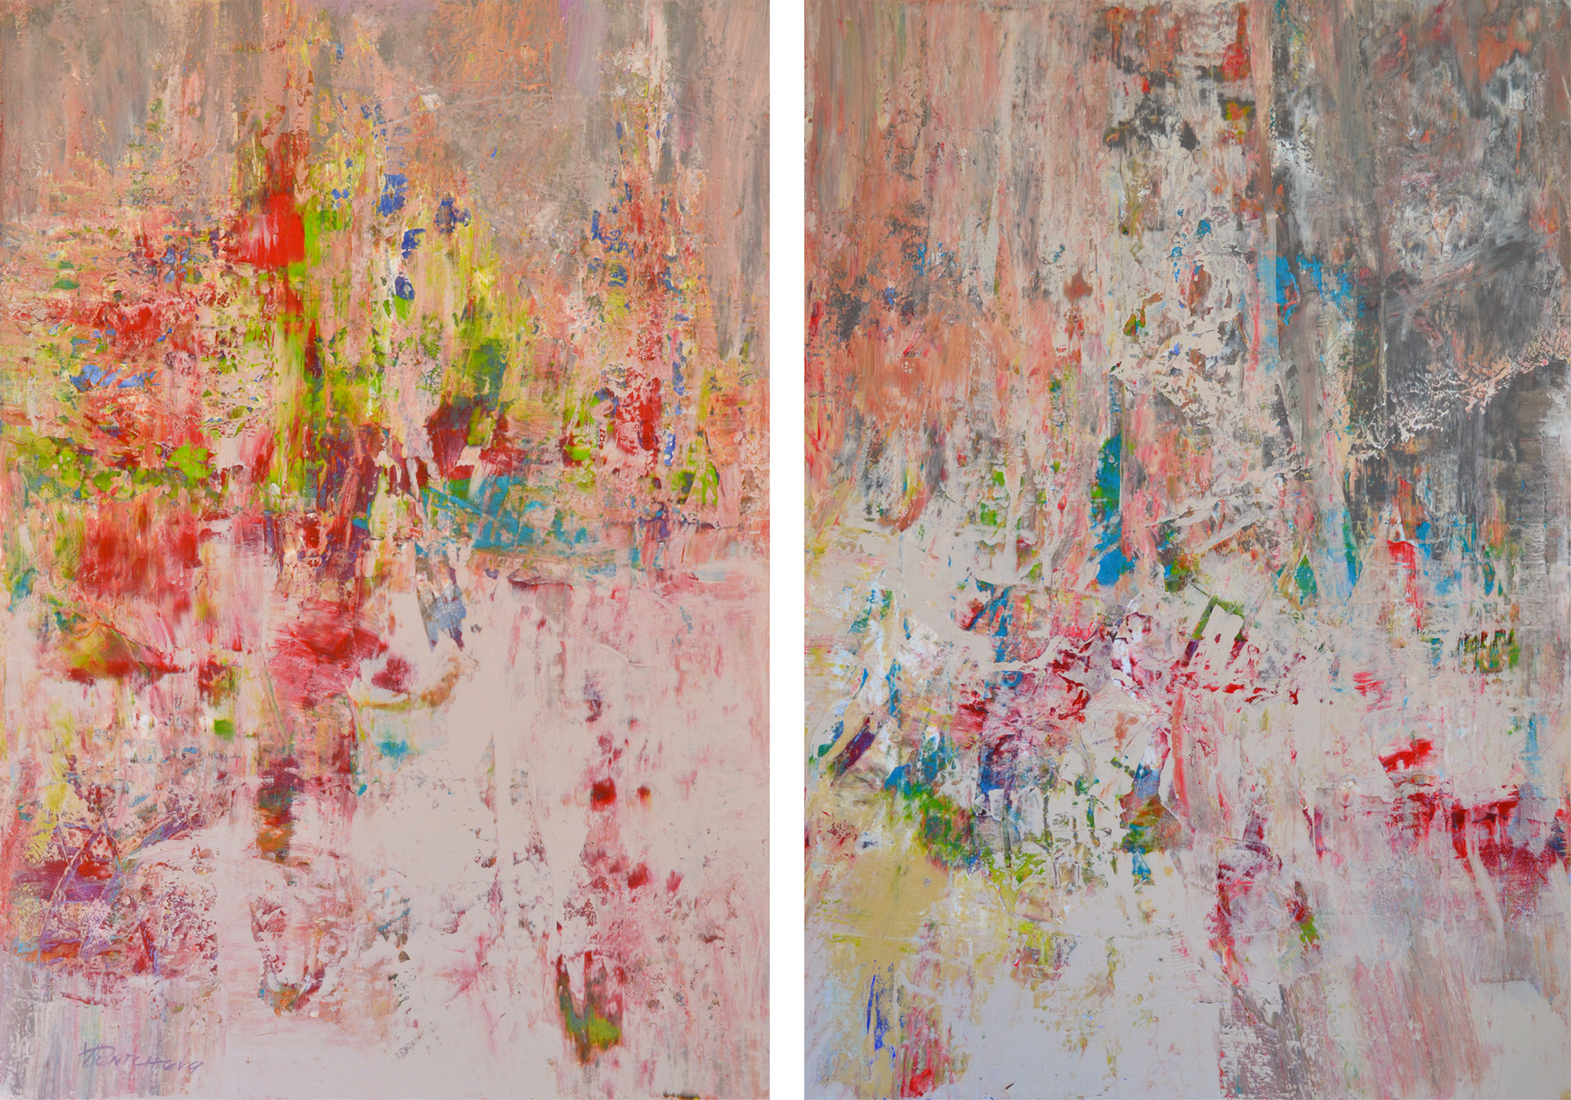 Blossoms at dusk. Diptych